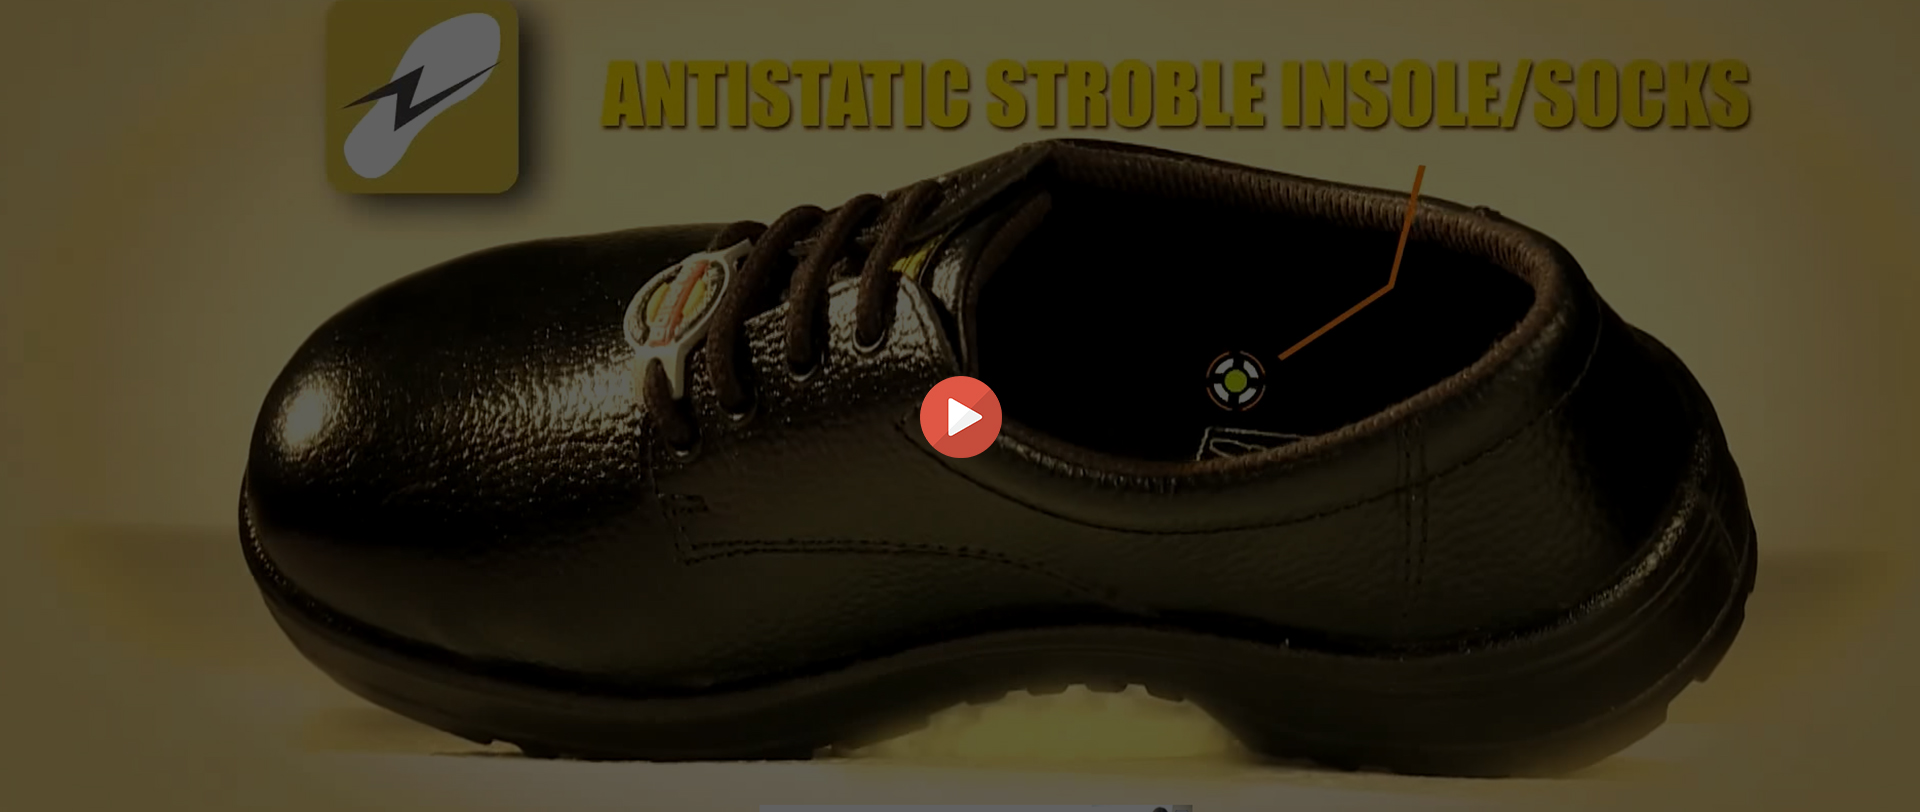 liberty warrior safety shoes manufacturing film